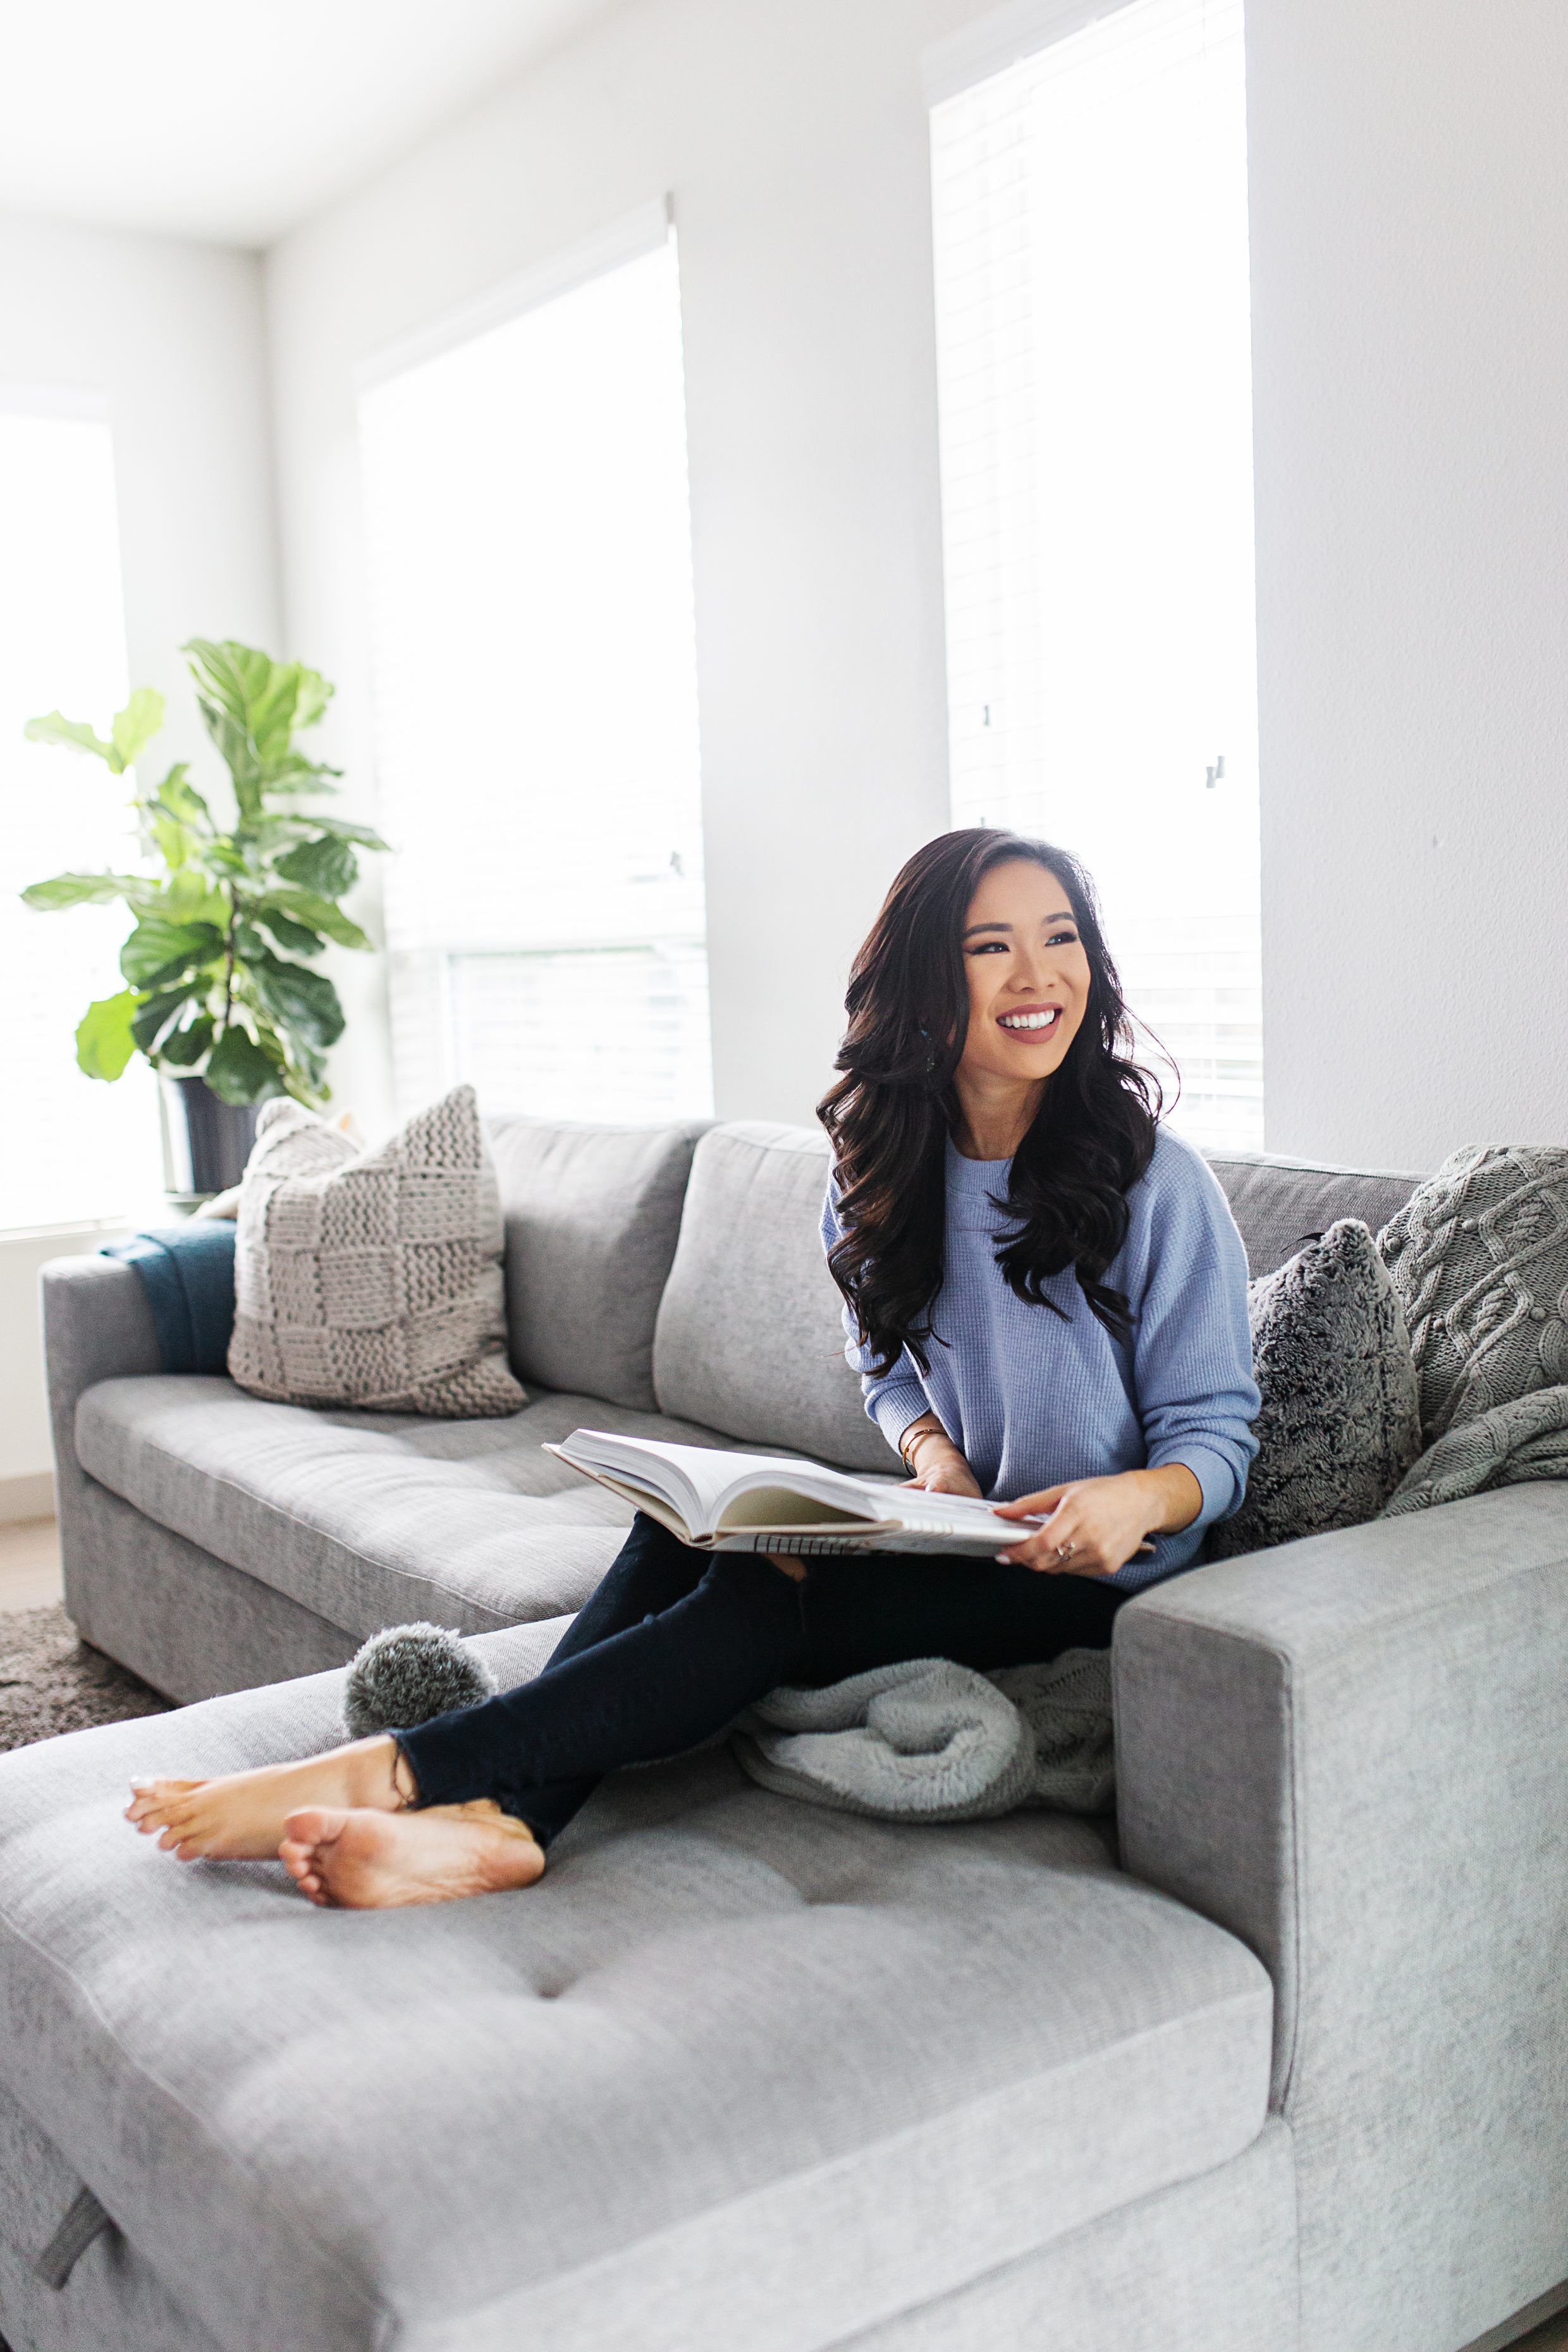 Blogger Hoang-Kim on her new Article Soma Sofa Bed in dawn gray